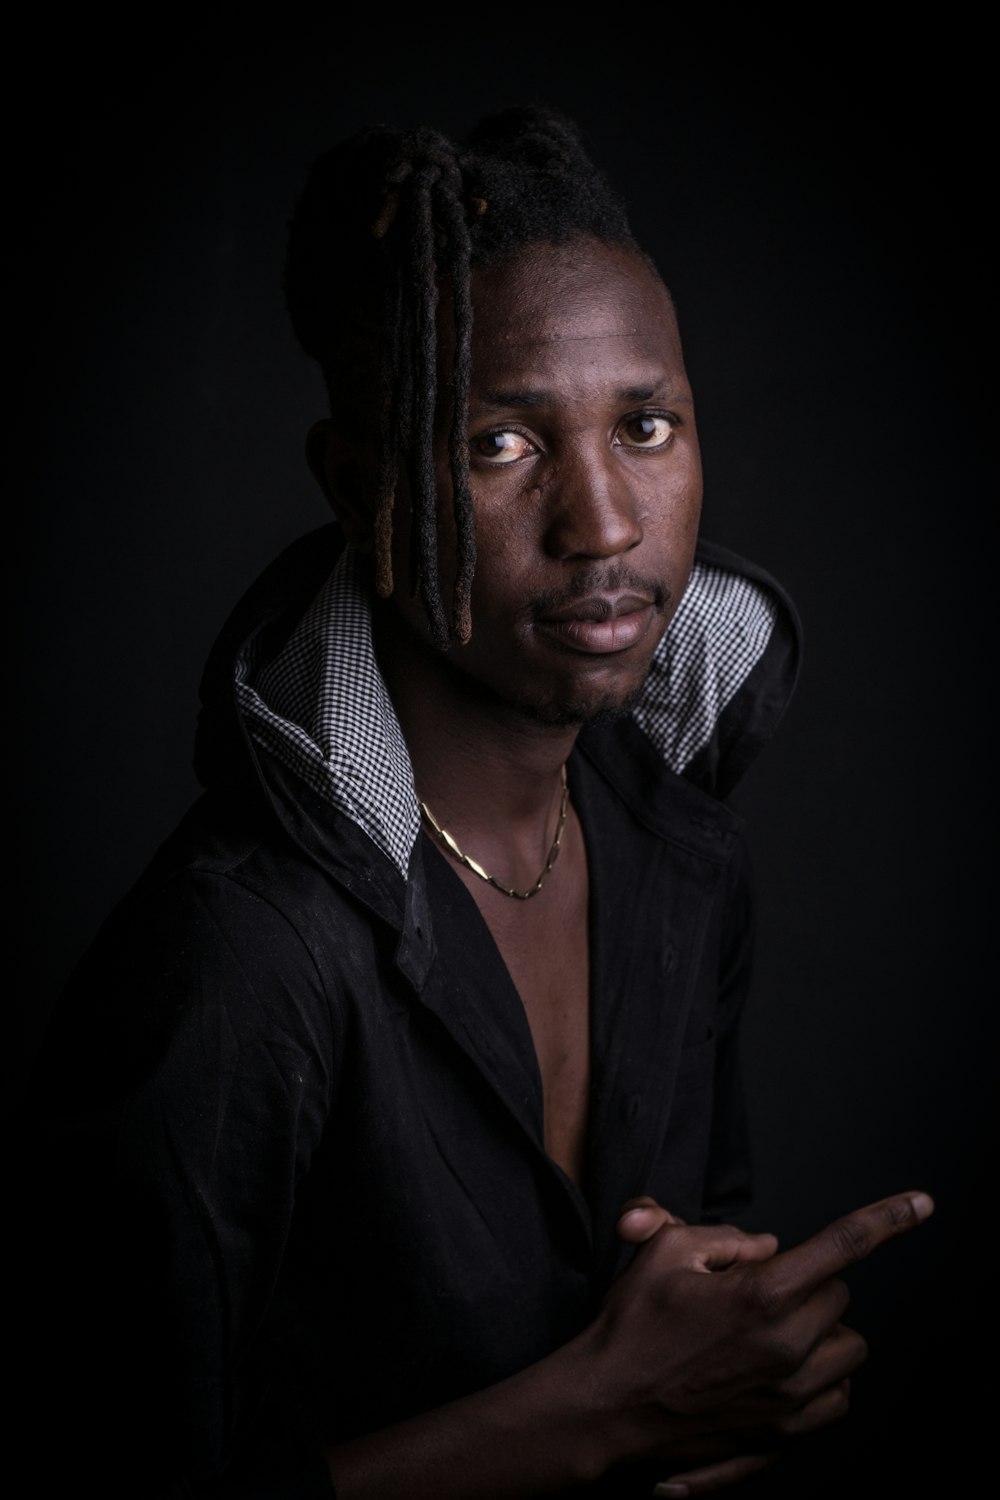 a man with dreadlocks is posing for a picture